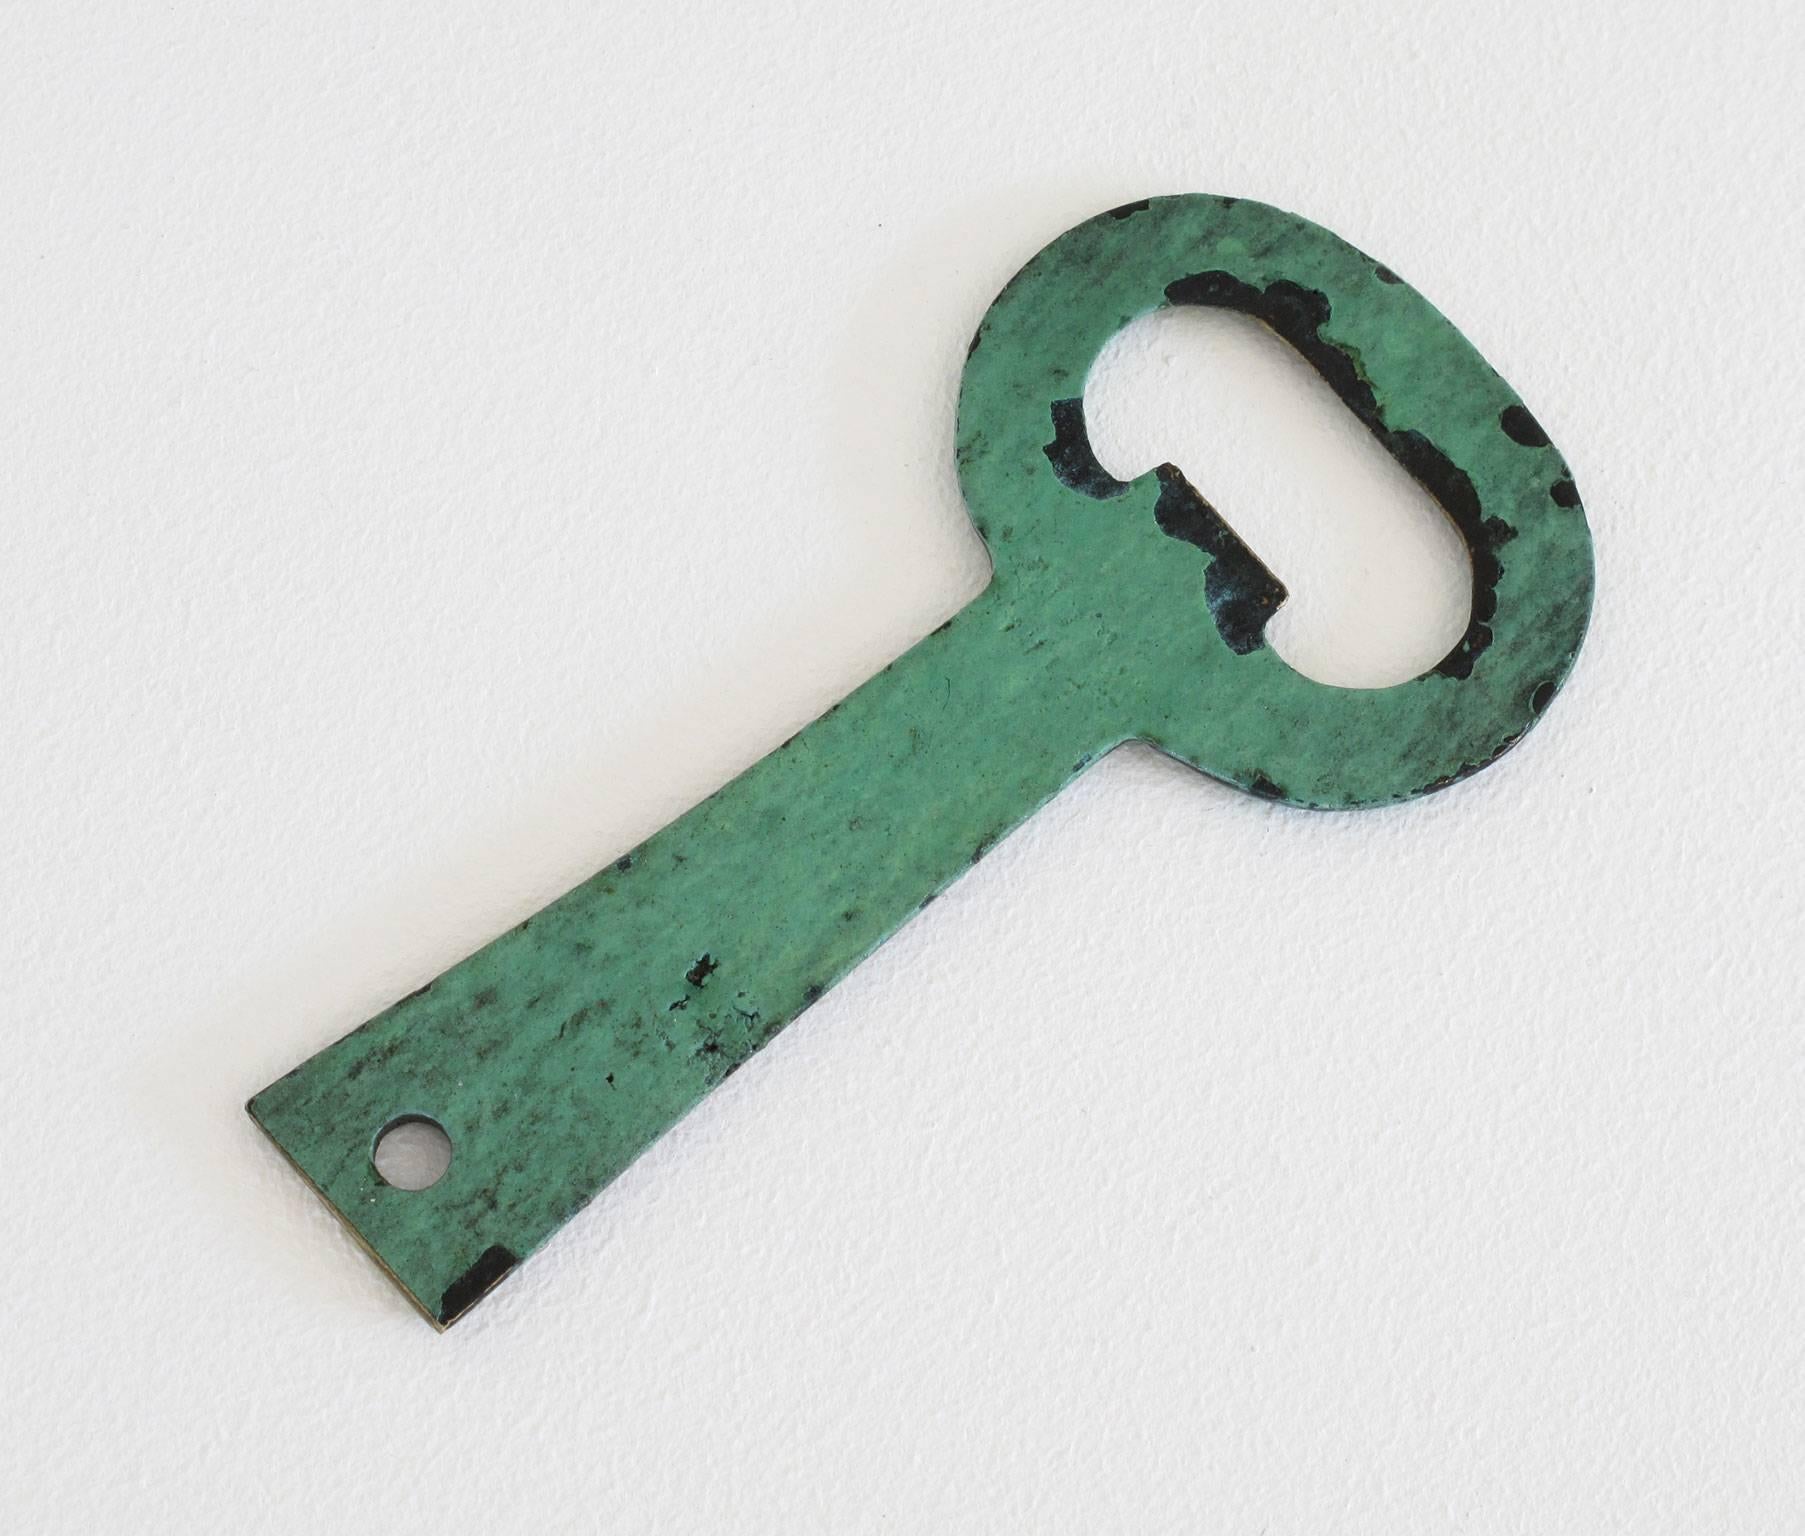 Mid-Century Modern Solid Brass Key Shaped Bottle Opener with Verdigris Patina For Sale